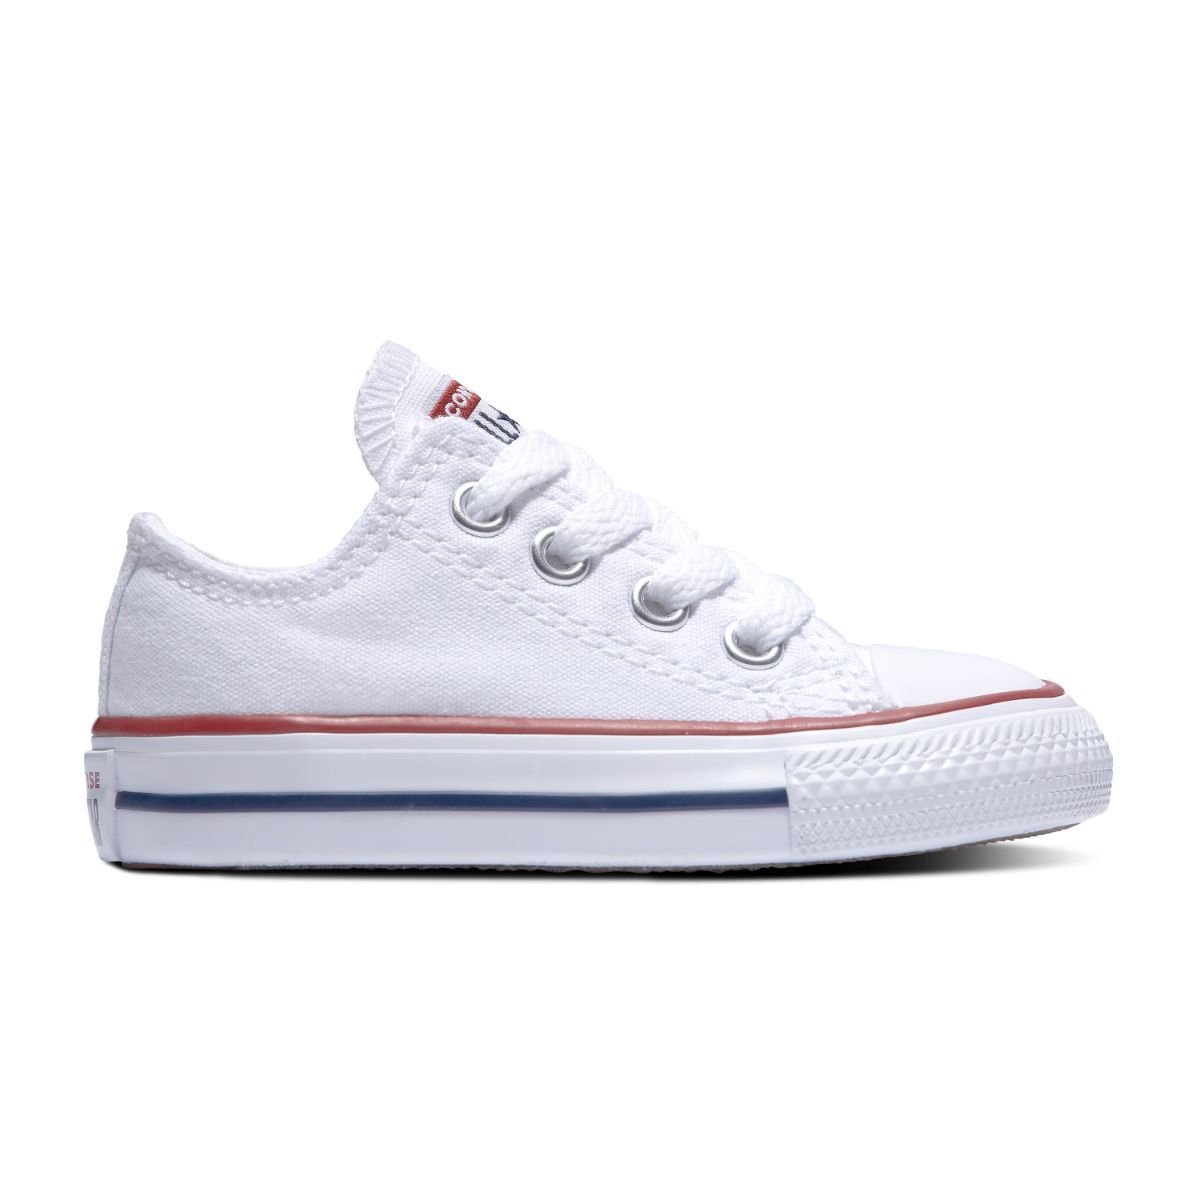 Toddler Chuck Taylor All Star White Low Top